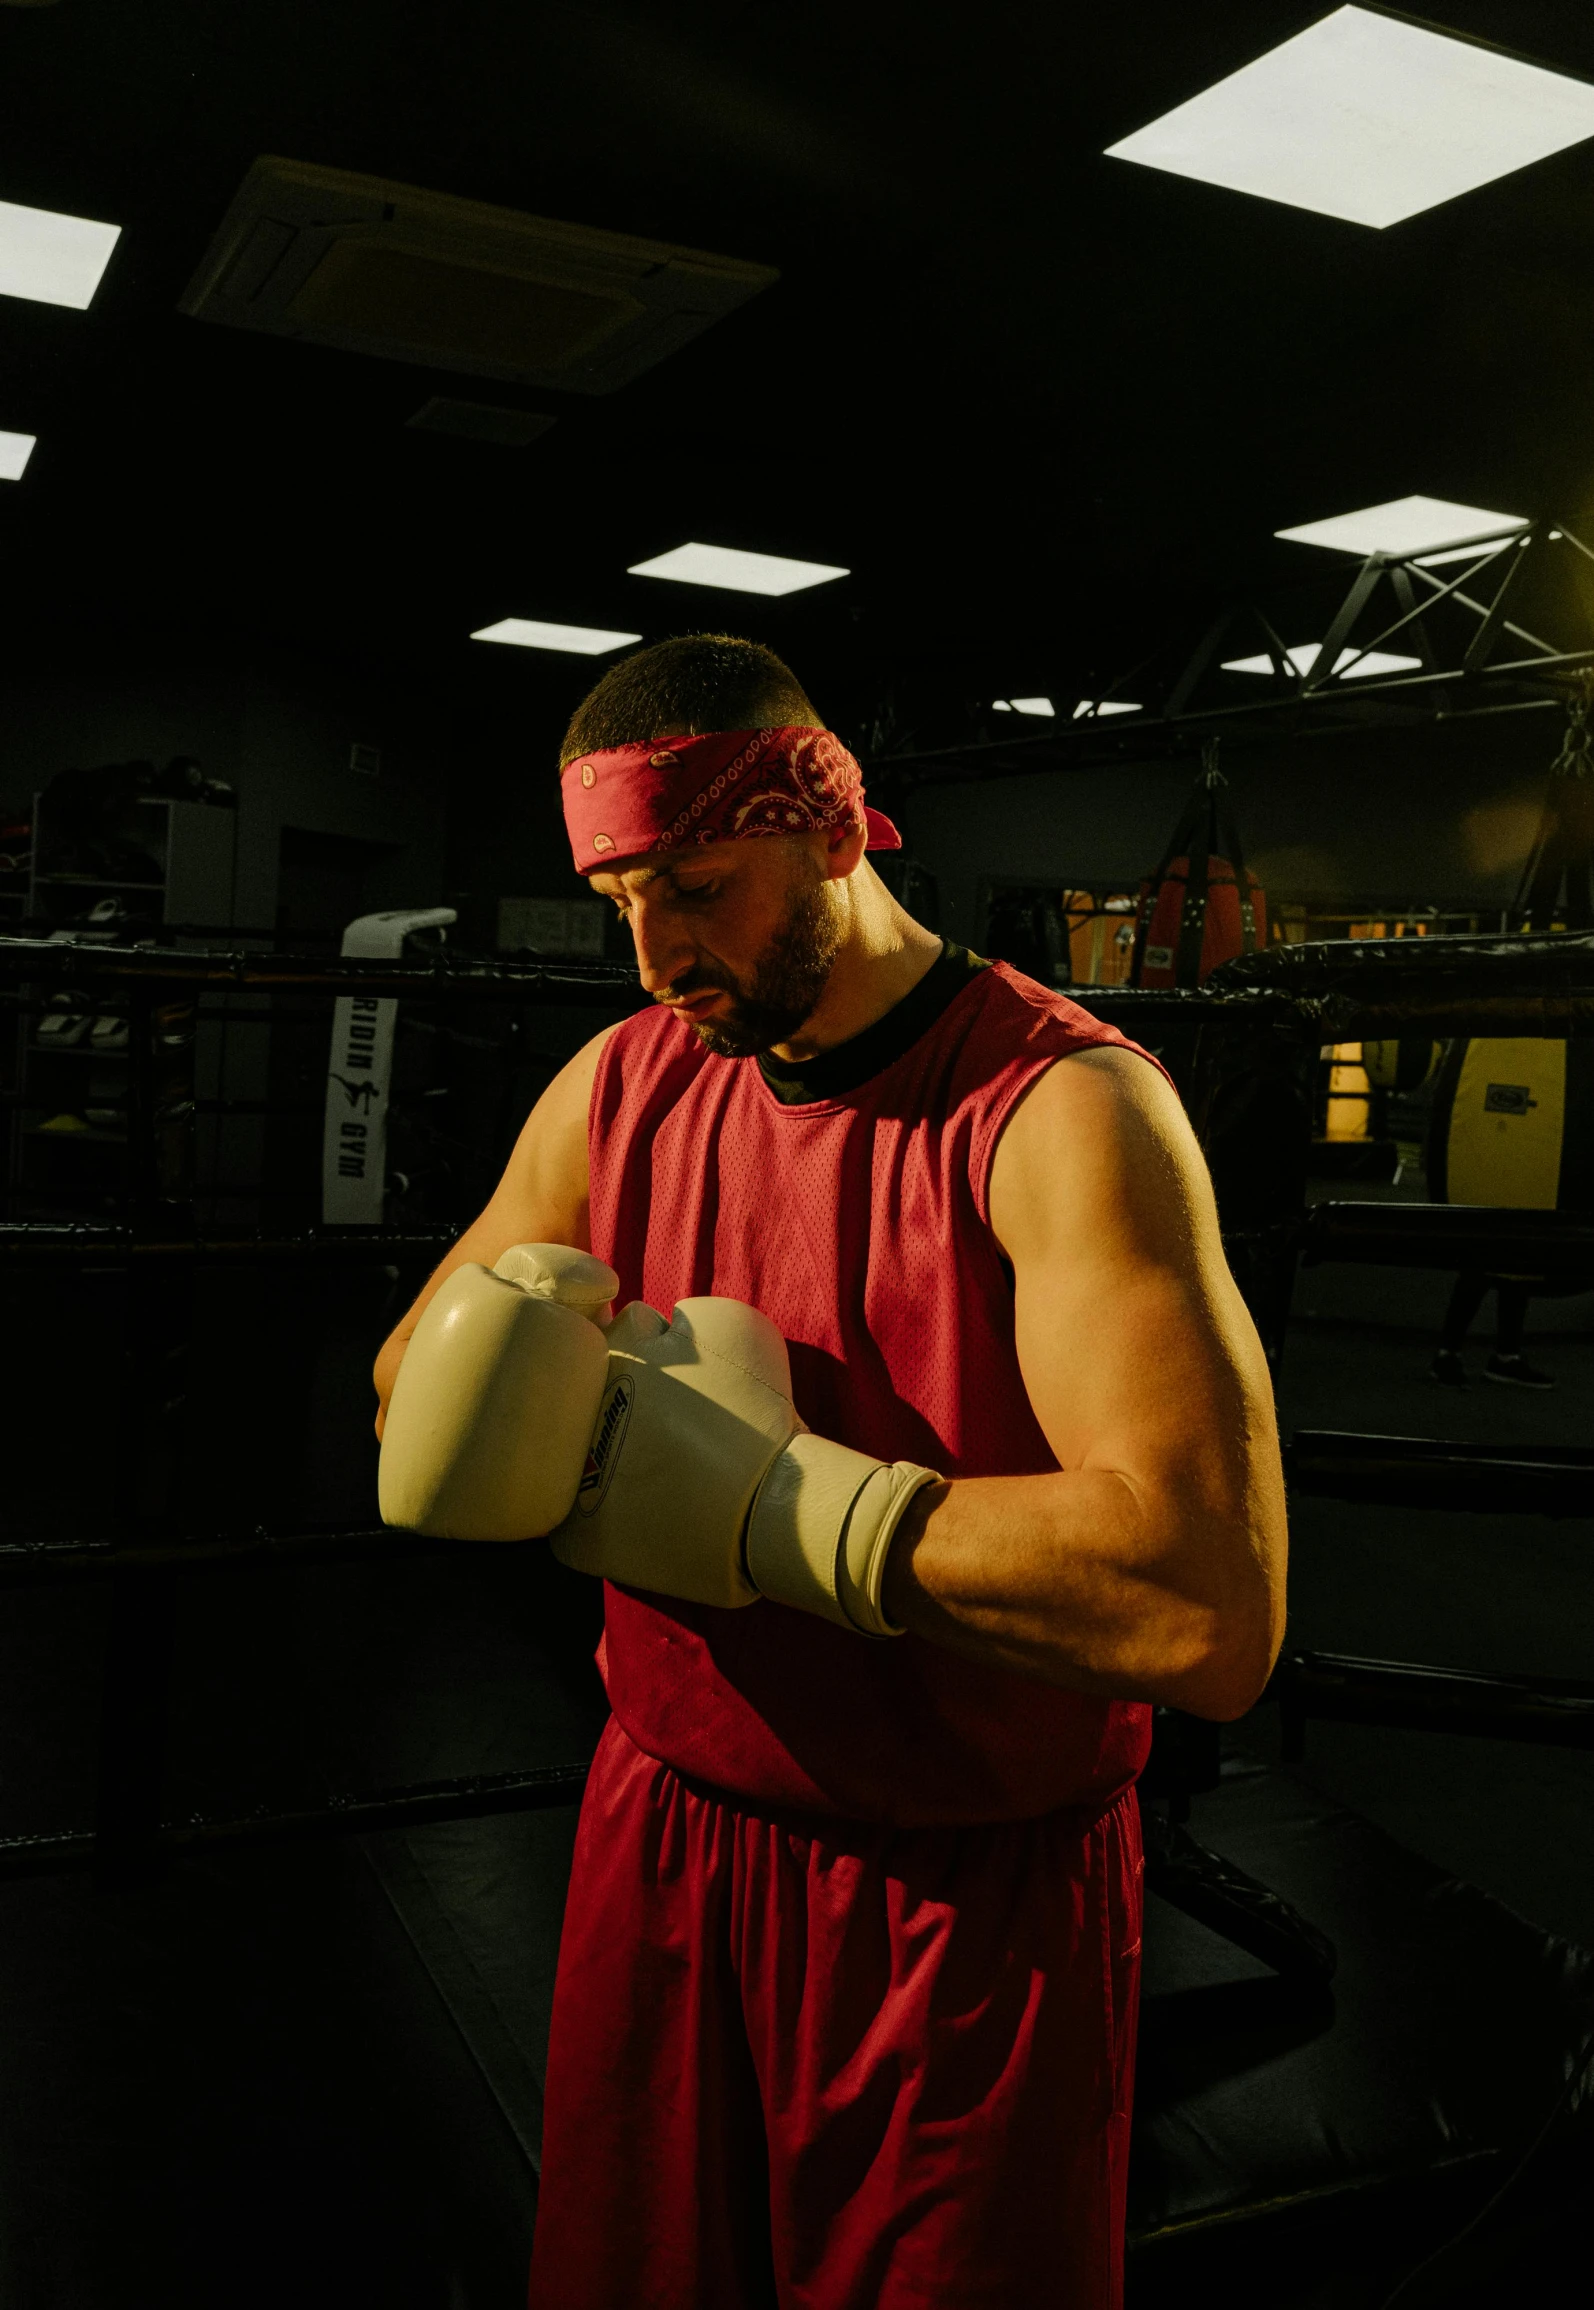 a man in a red wrestling outfit prepares for a match